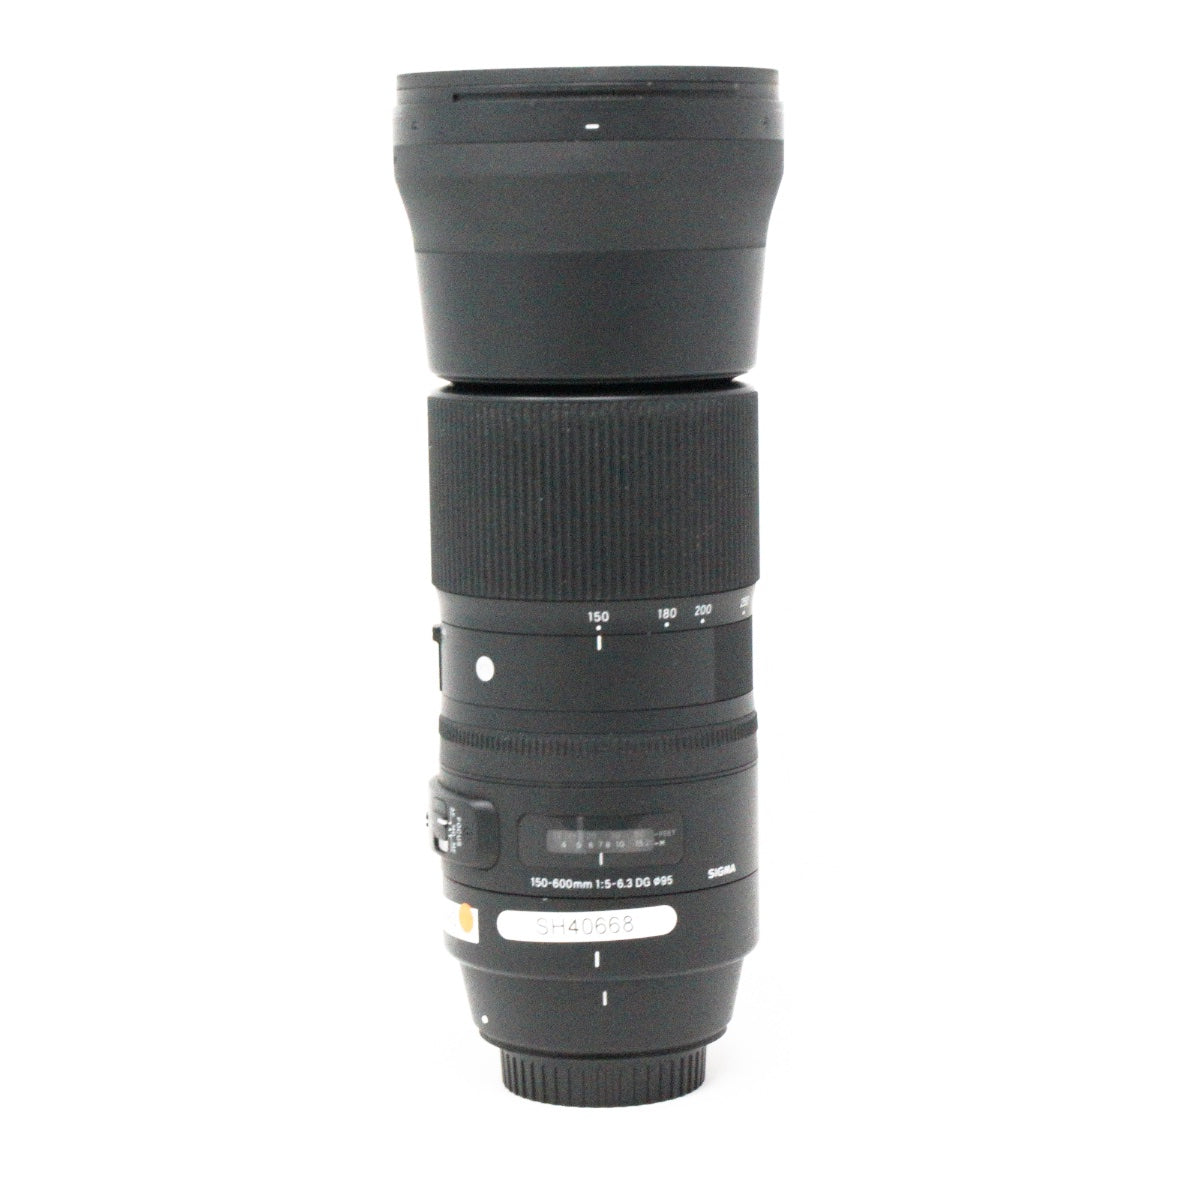 Used Sigma 150-600mm F5-6.3 DG OS lens in Canon EF